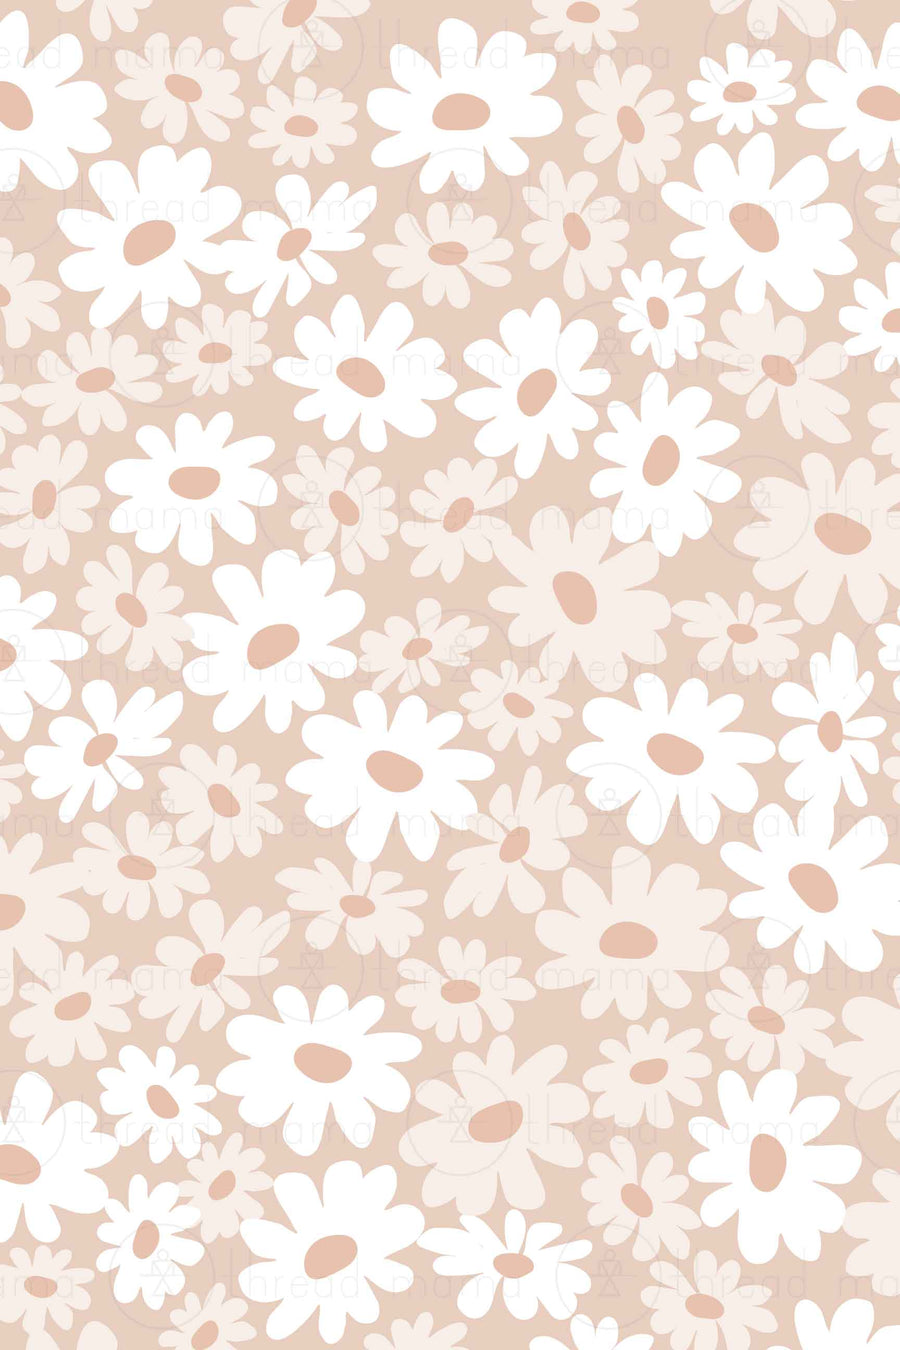 Repeating Pattern 51 Collection (Seamless)